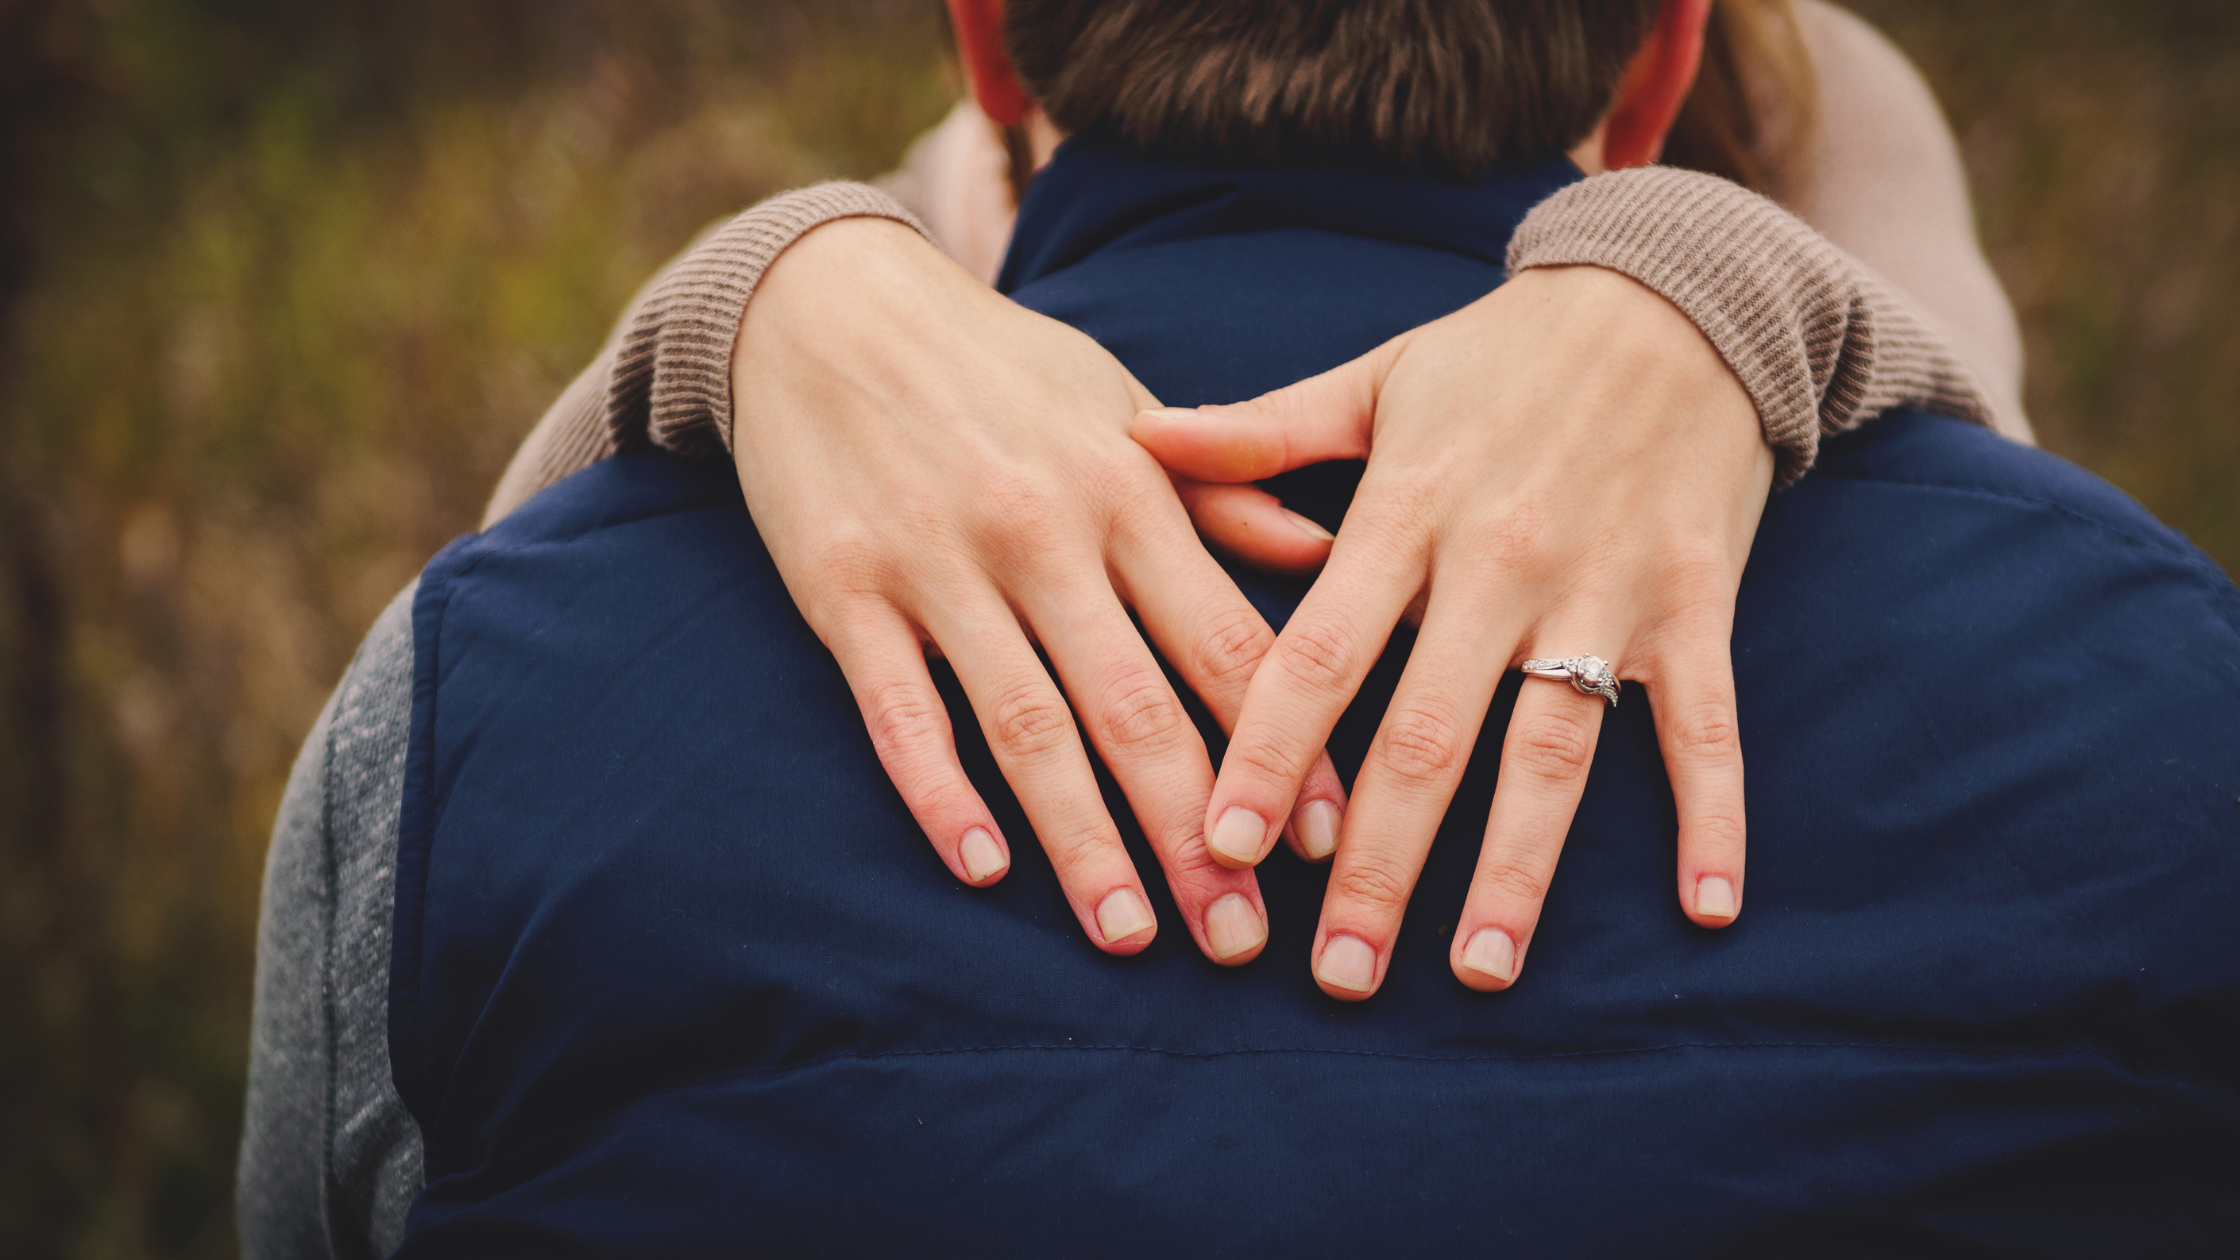 30 Engagement Ring Photos to Hard Launch Your Engagement